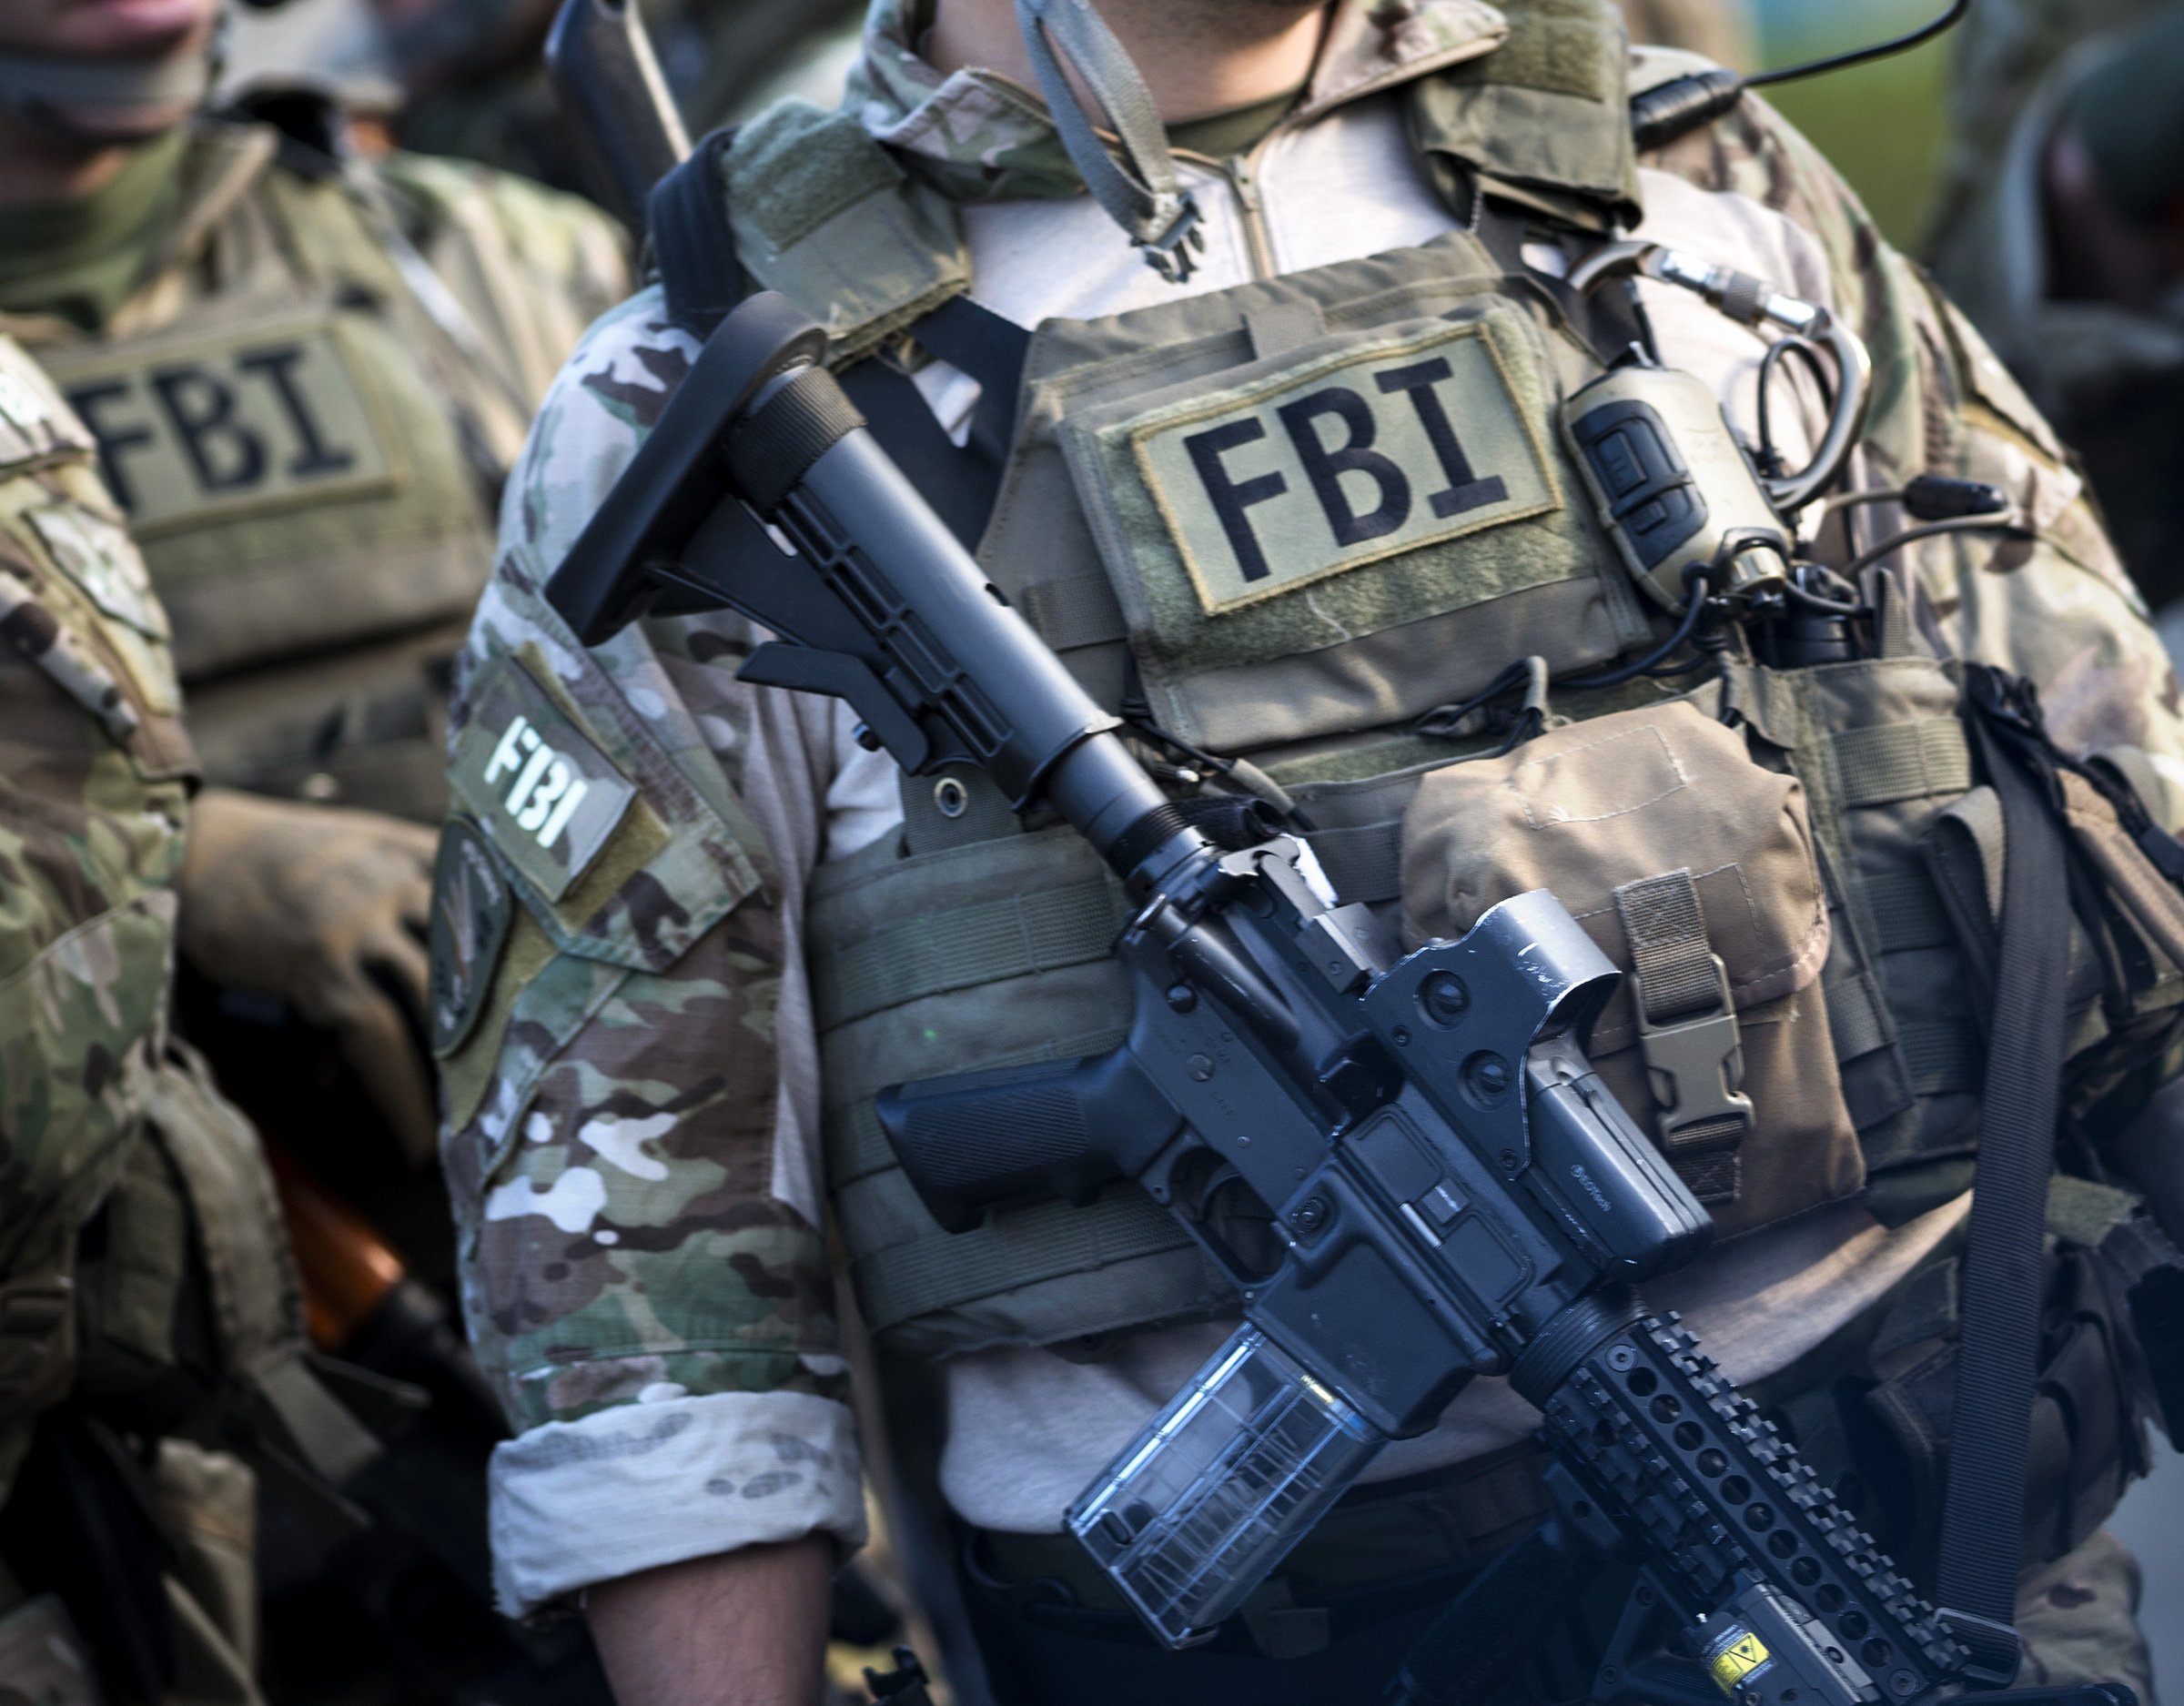 Members of a Federal Bureau of Investigation SWAT team are seen during an FBI field training exercise at the Landmark Mall on May 2, 2014 in Alexandria, Virginia.